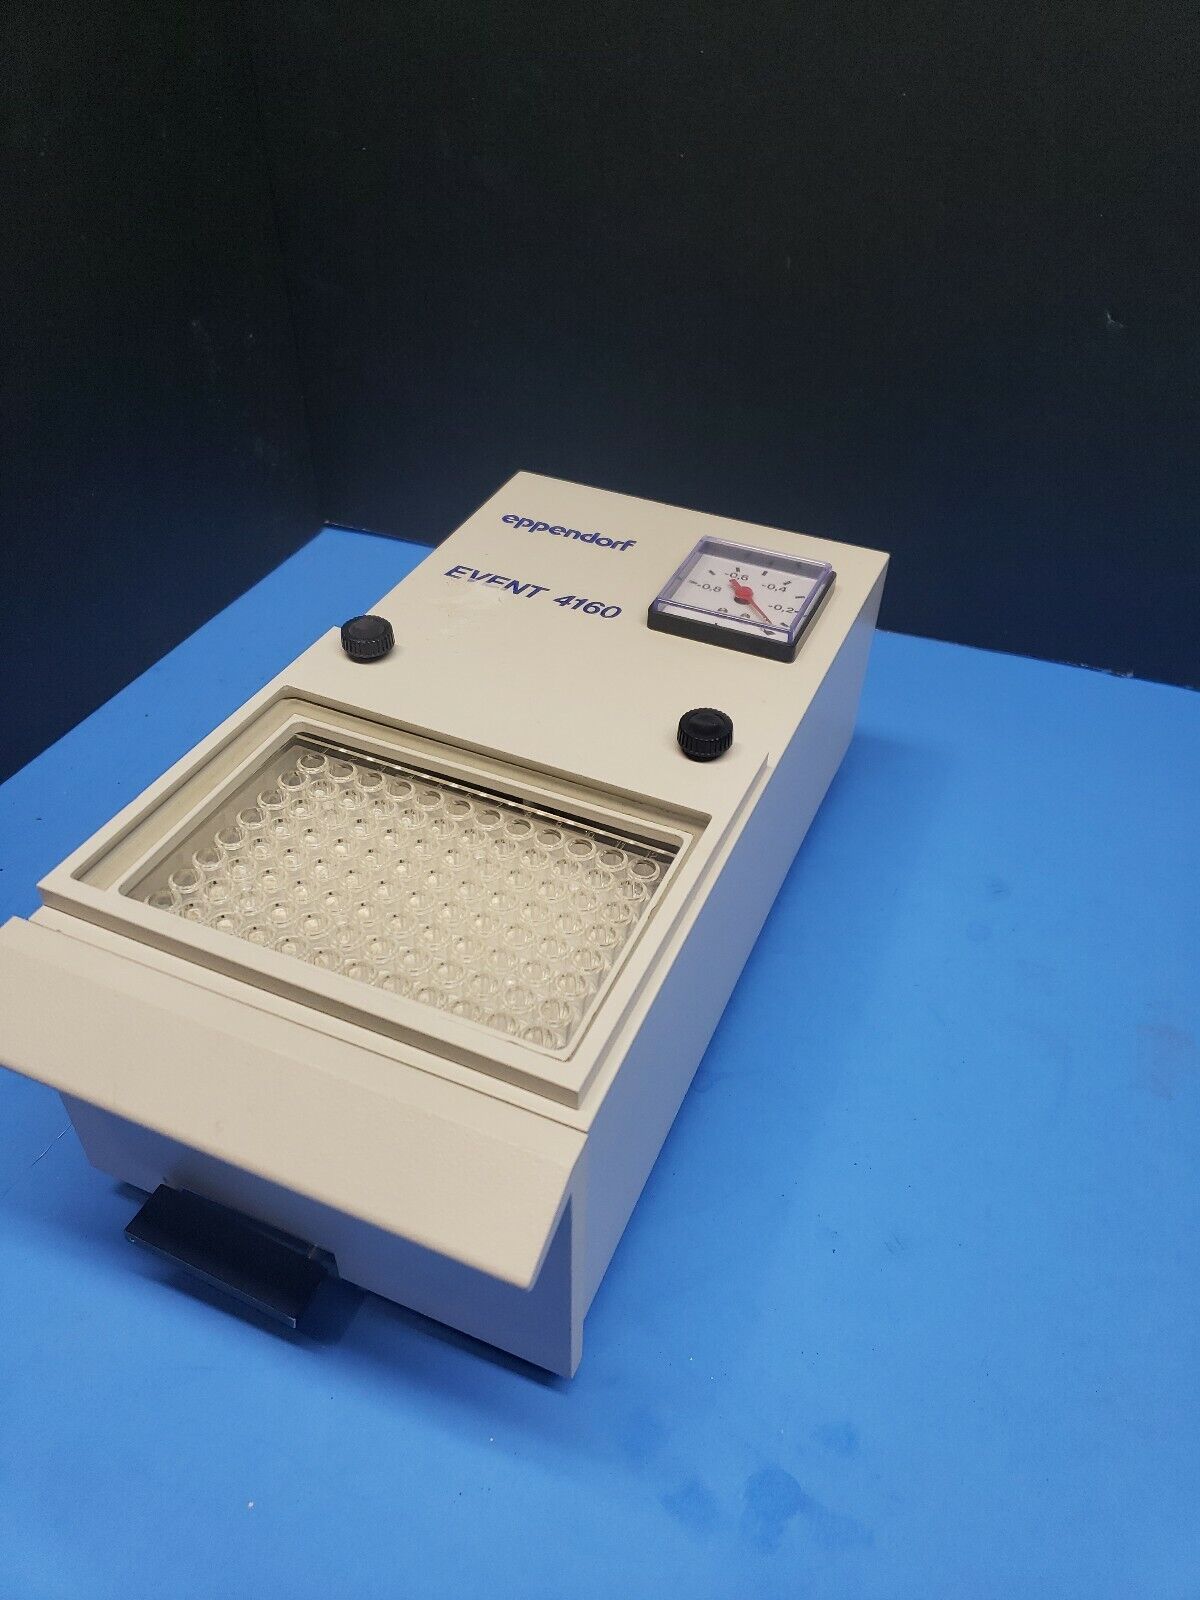 Eppendorf Vacuum Event 4160 DNA Purifying Vac Manifold Laboratory Excellent 230